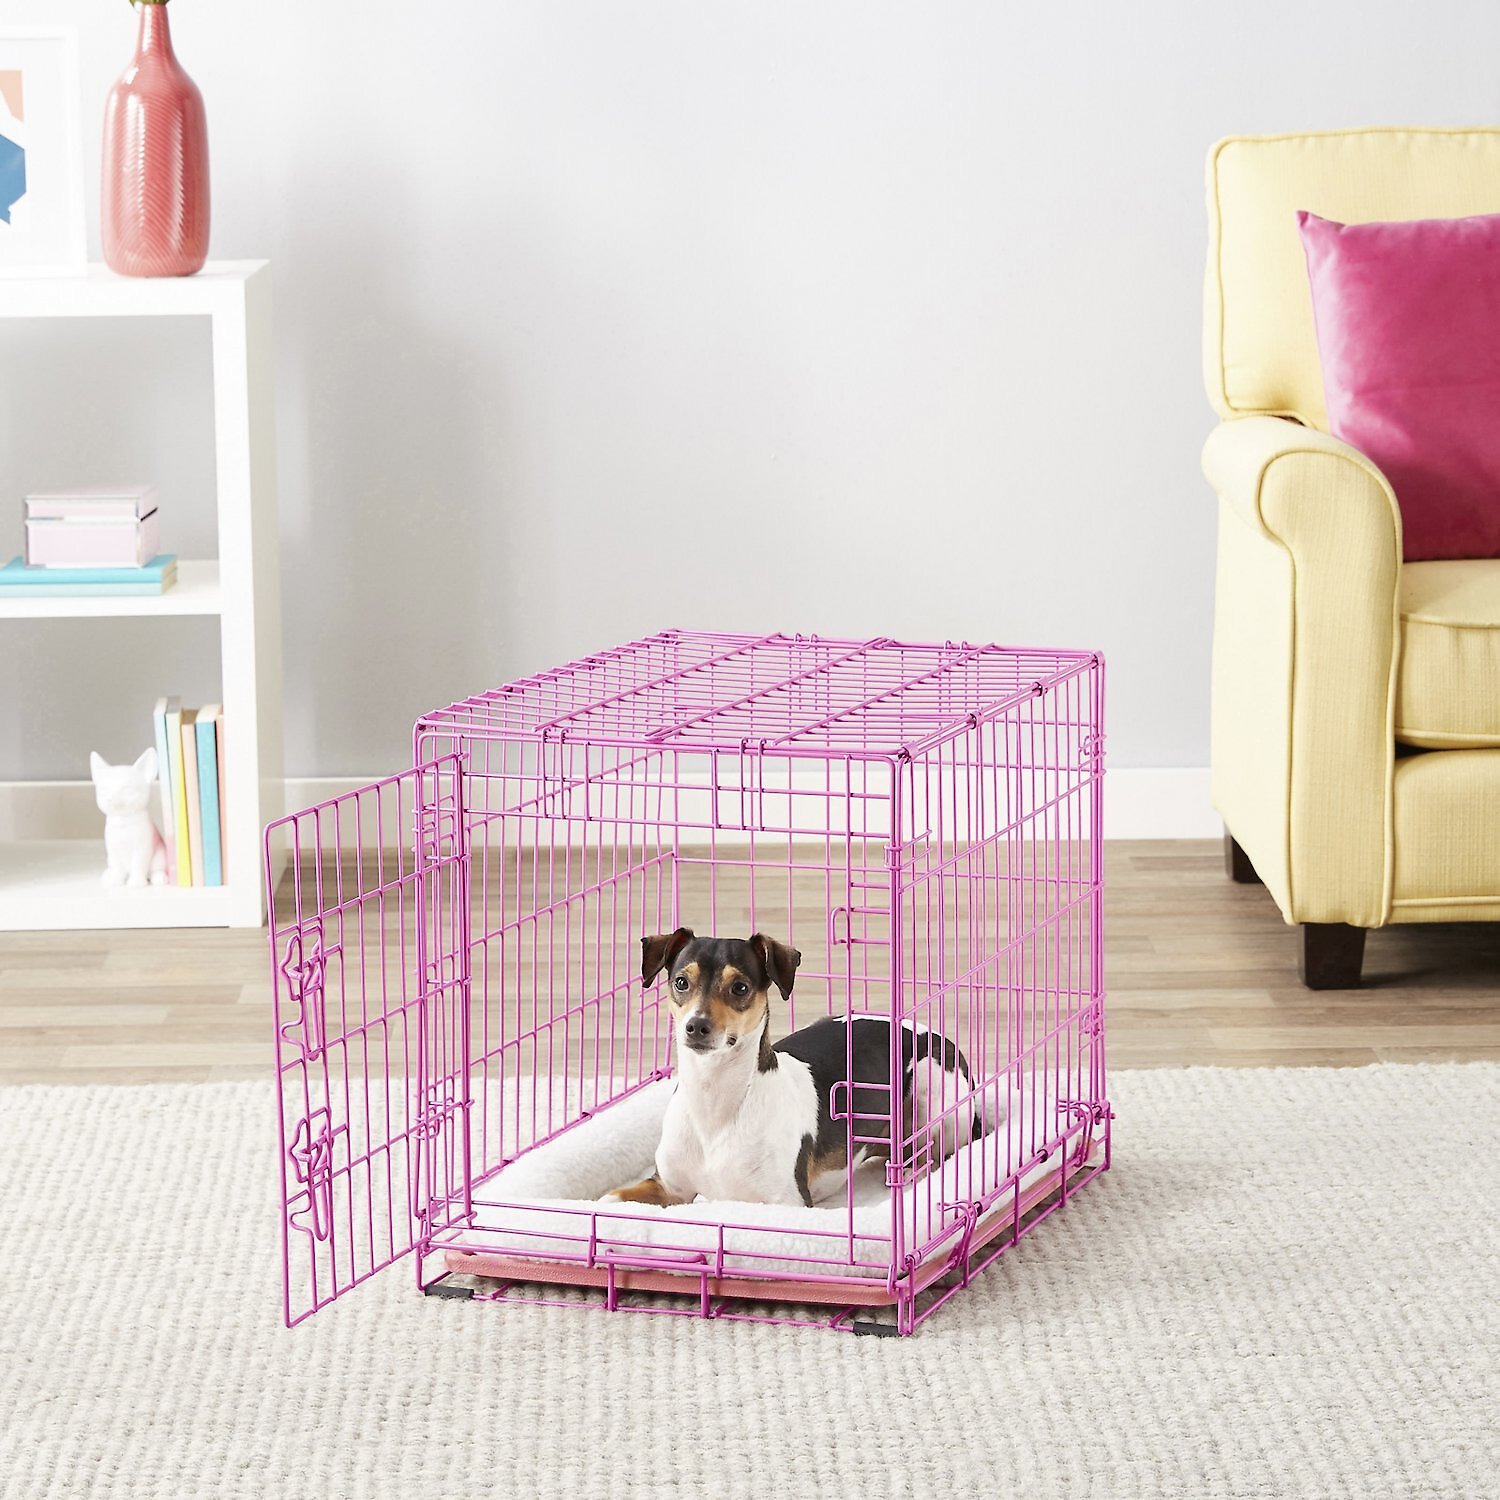 Dog Crate Pet Dog Puppy Cat Metal Foldable Carry Transport Training Cage Crate Pink 24